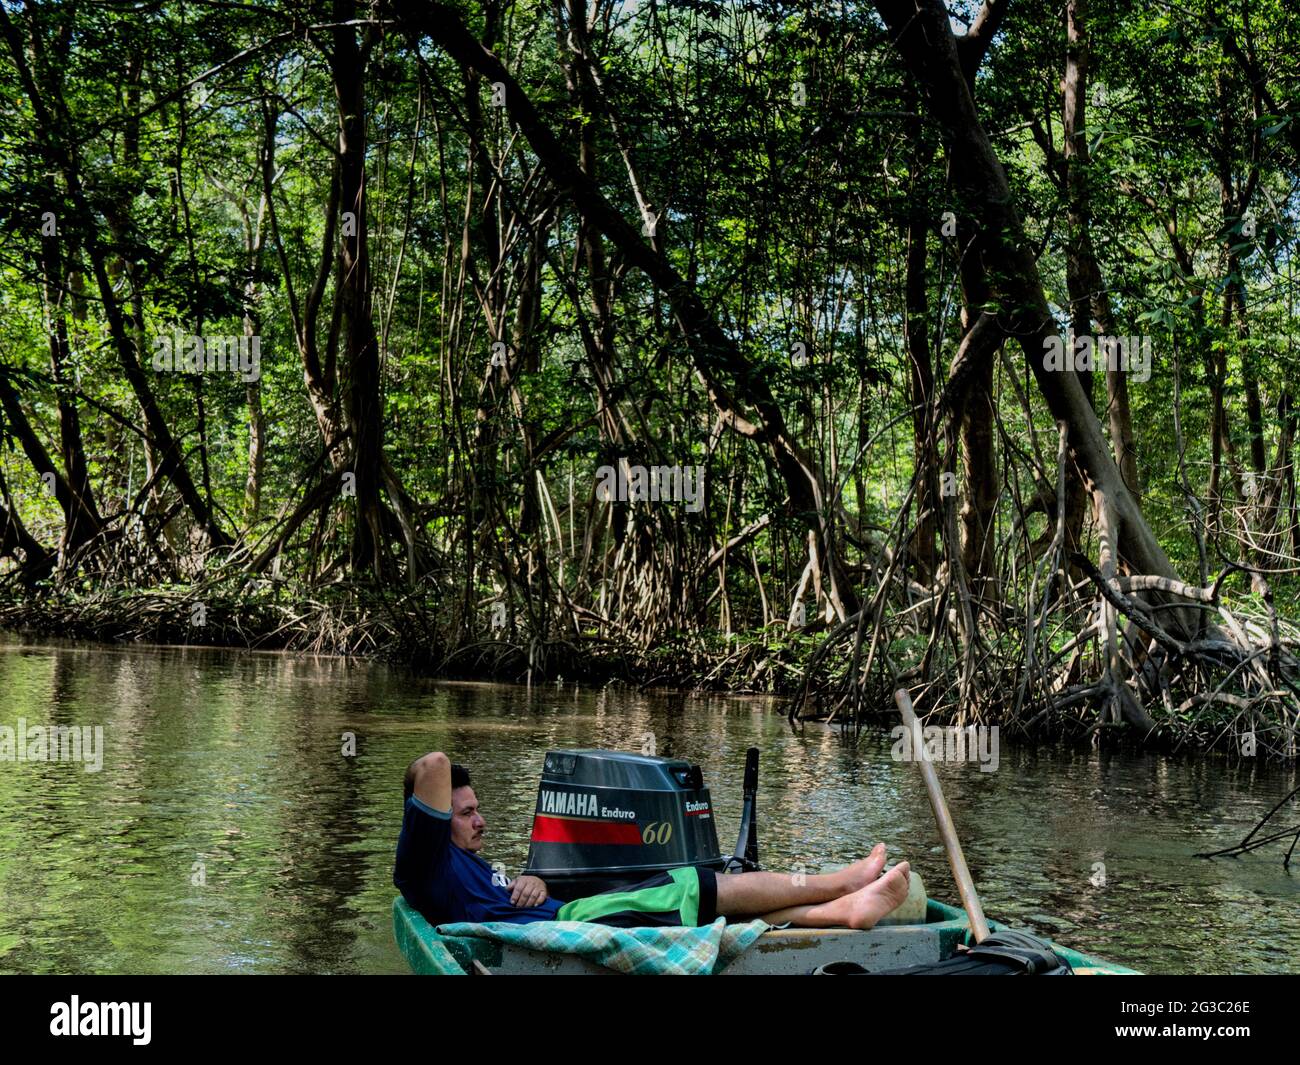 A resident of the Montecristo Island takes a break on his boat along the canals next to the Mangroves Stock Photo